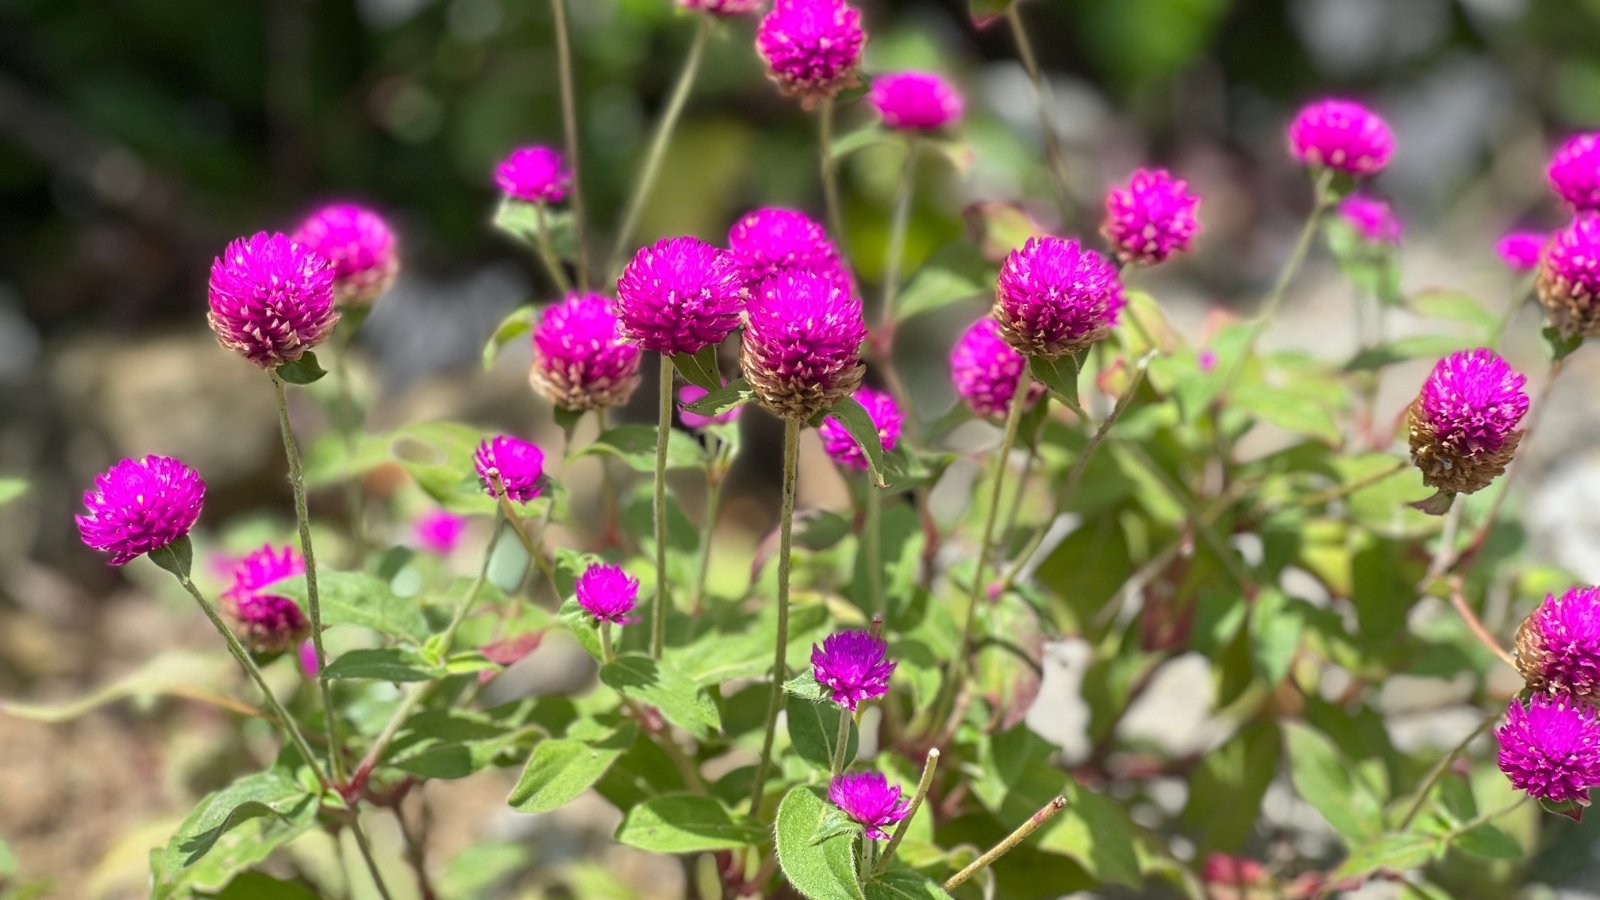 Gomphrena globosa features branching stems and ovate leaves, topped with spherical flower heads in a bright pink-purple hue.